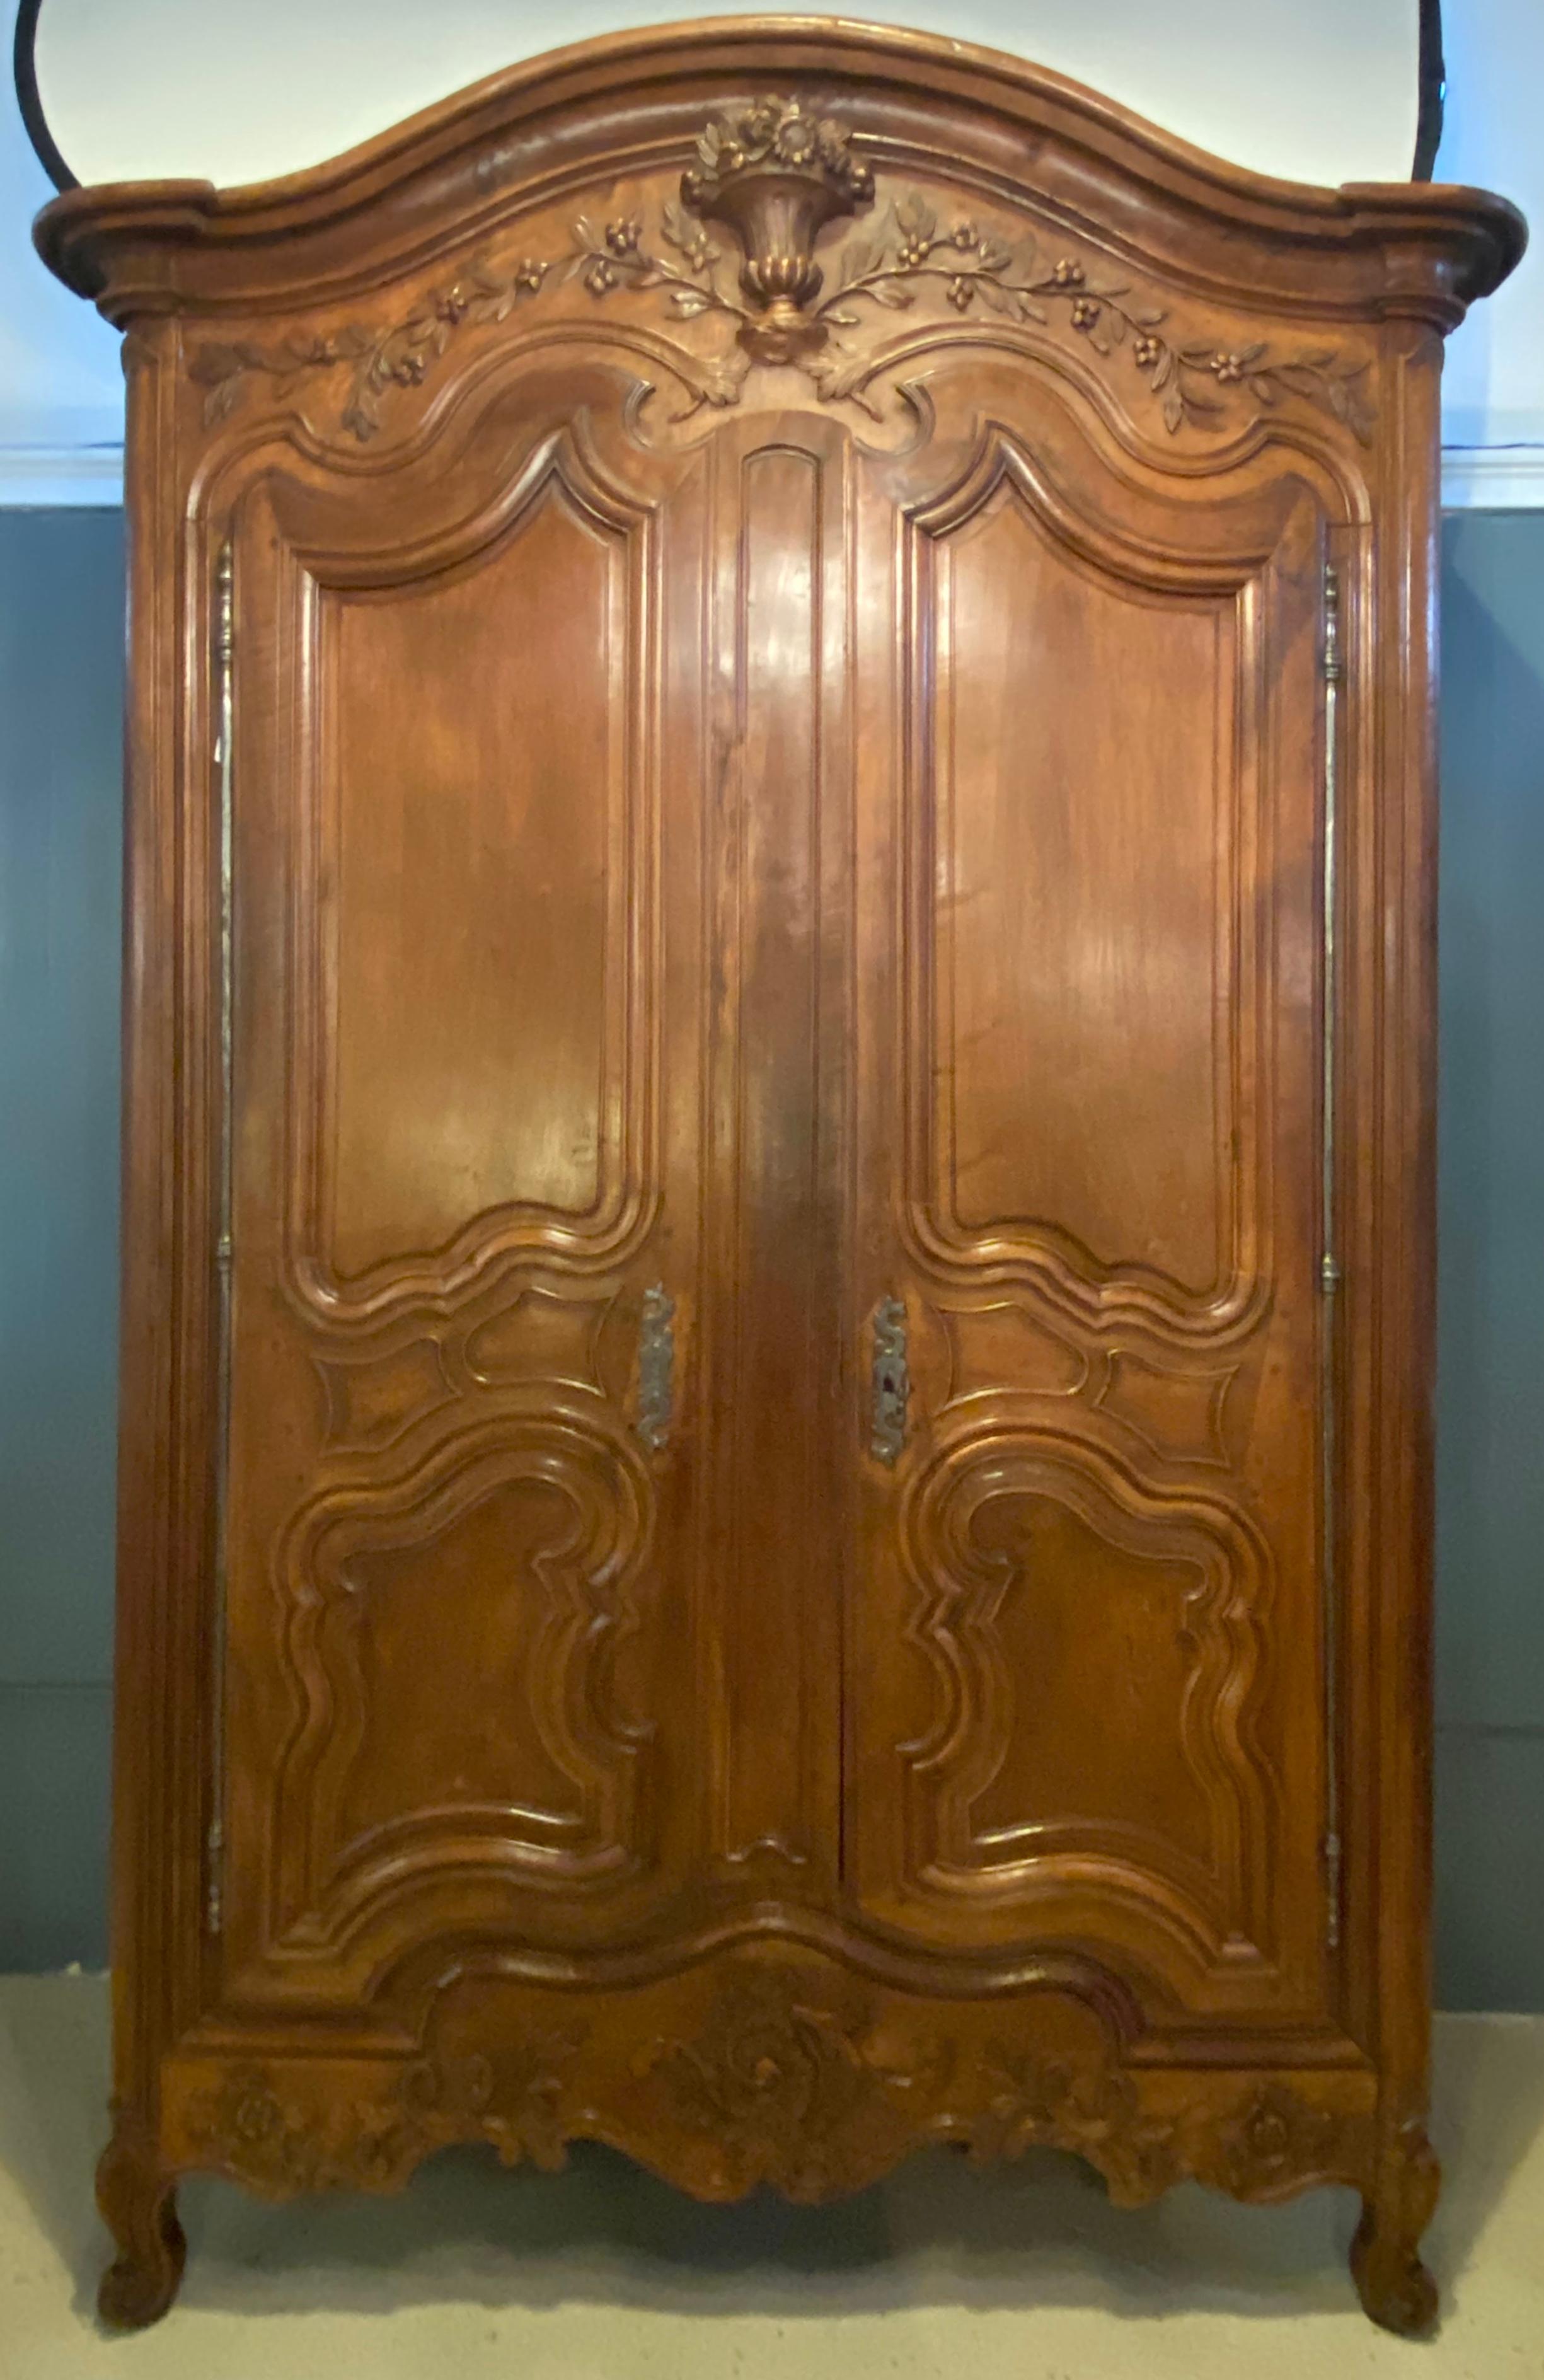 18th century Louis XV armoire wonderfully carved with all original hardware having a single key. This exquisite period armoire is simply stunning with the finest of carvings having double doors that open to a fitted shelved interior. Disassembles